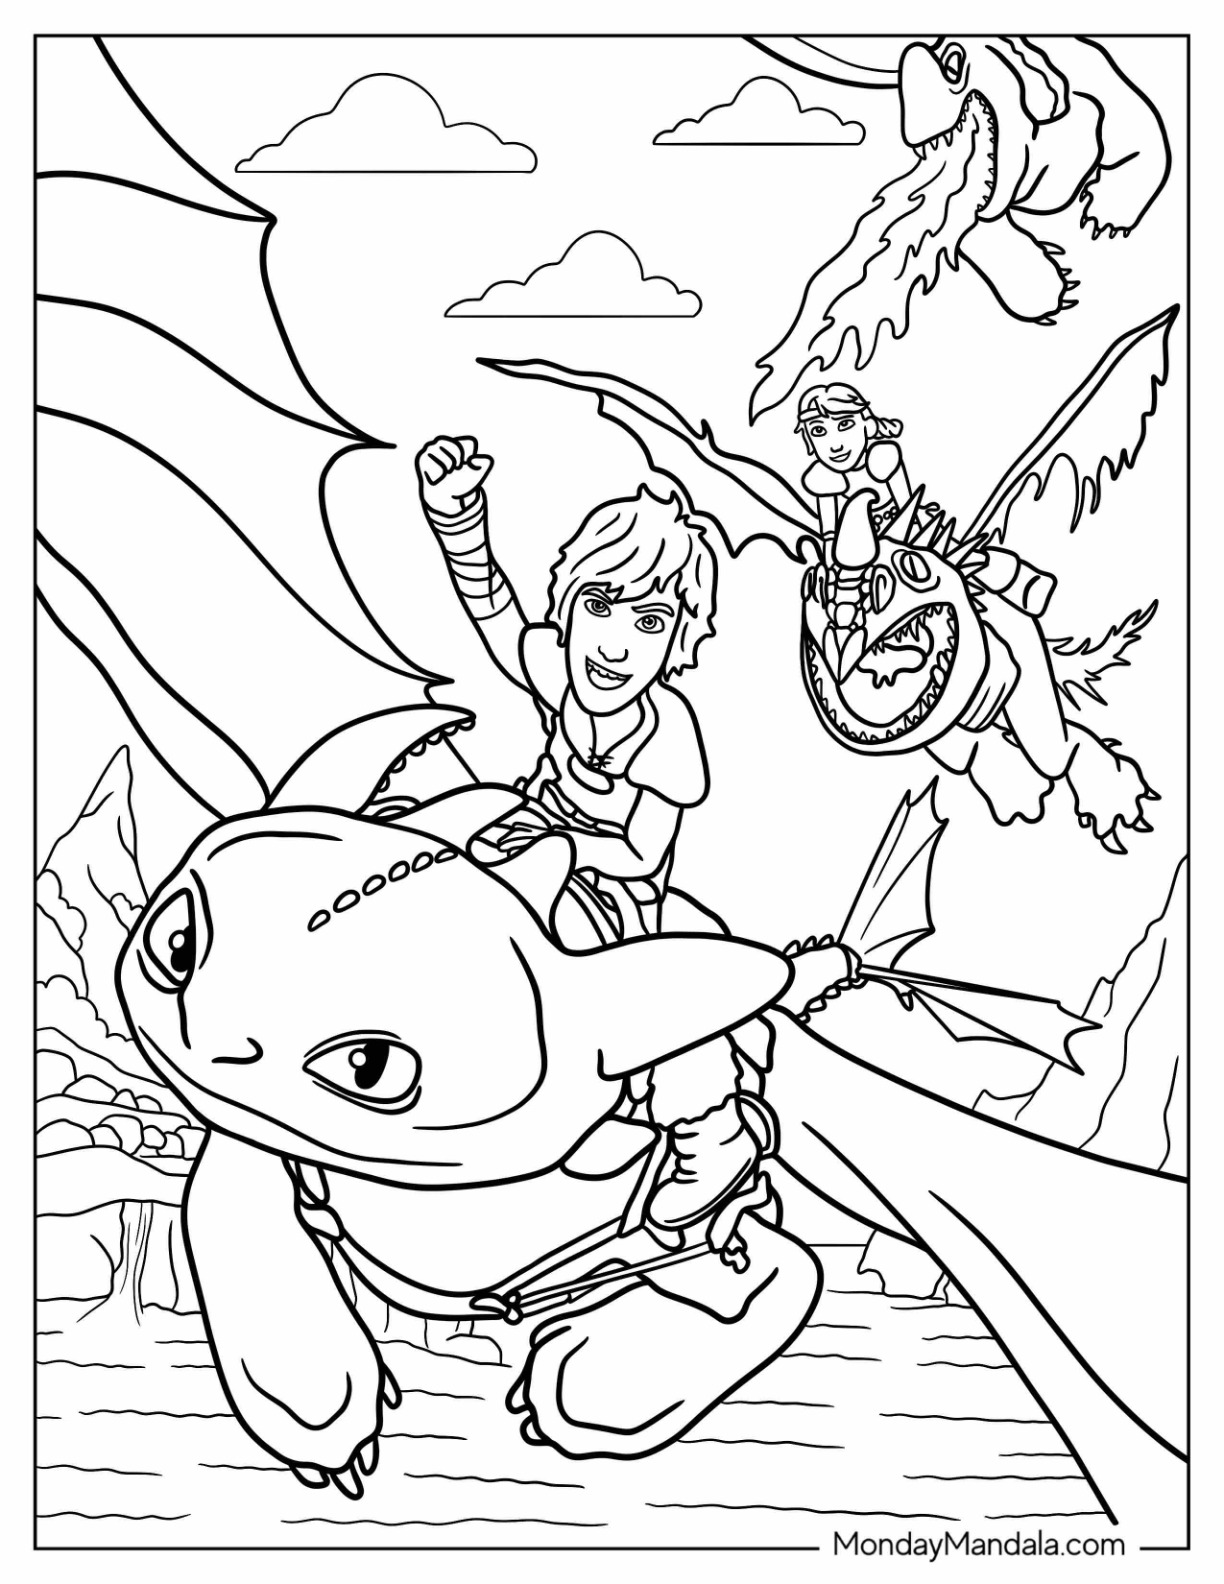 How to train your dragon coloring pages free pdfs